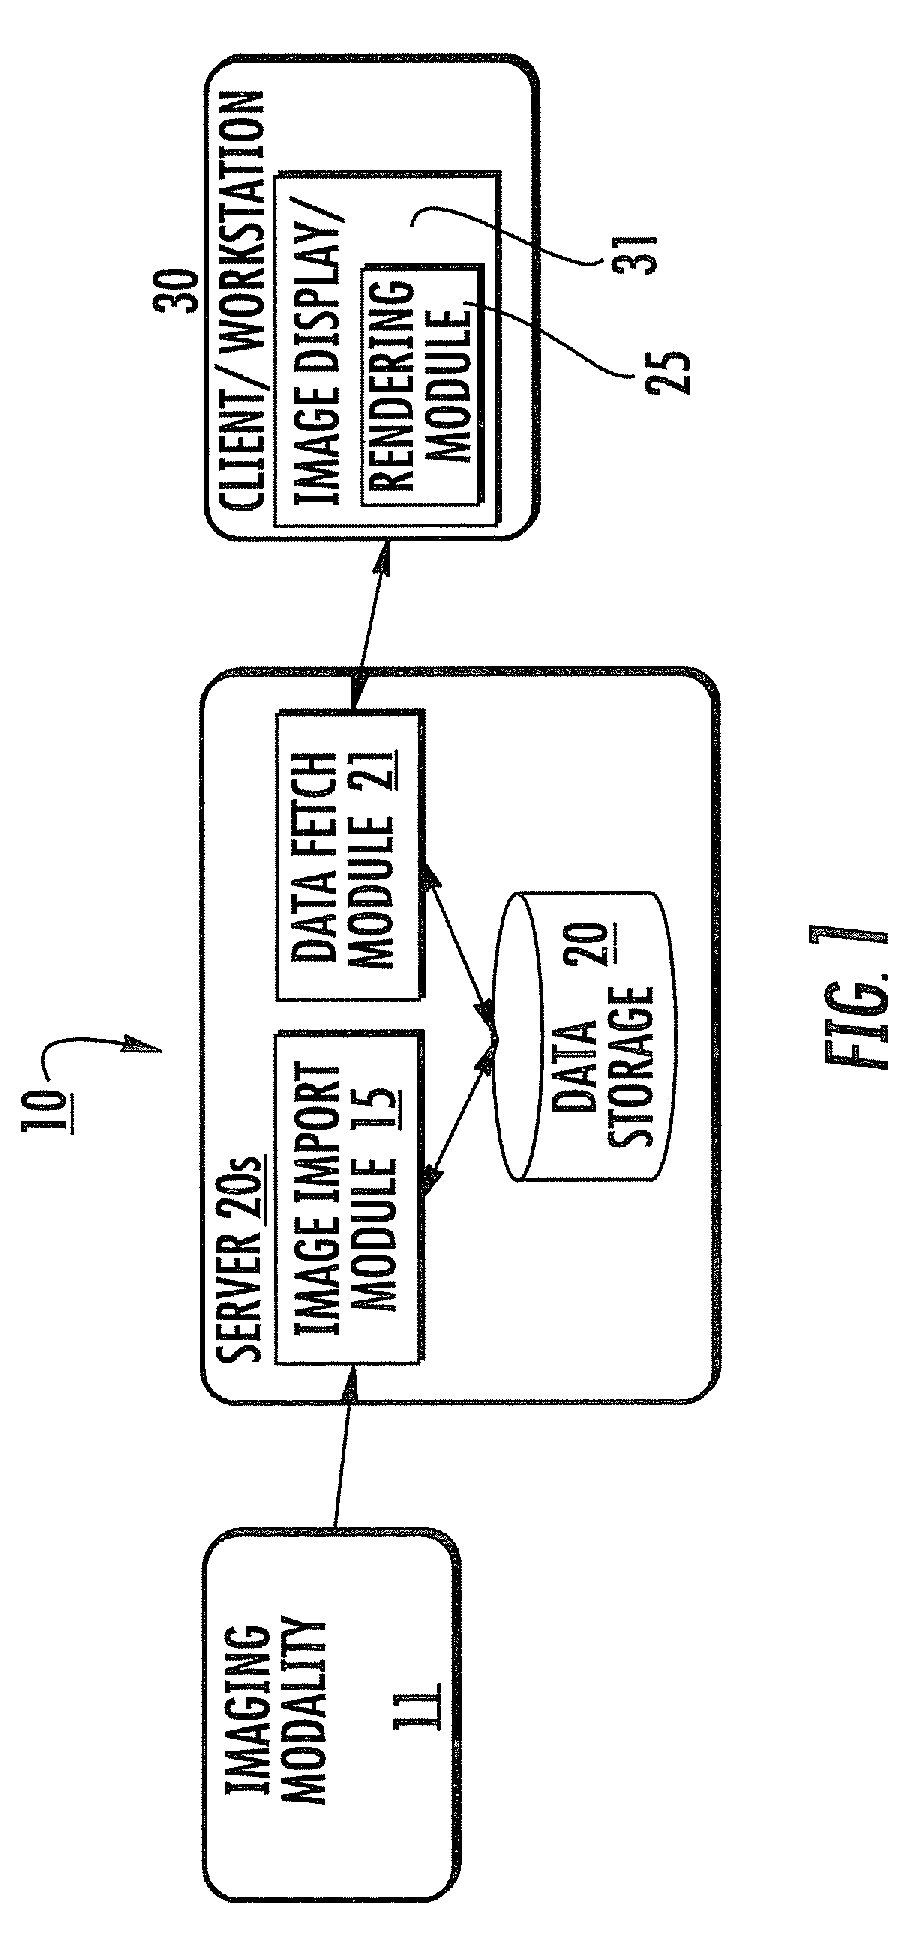 Systems for visualizing images using explicit quality prioritization of a feature(s) in multidimensional image data sets, related methods and computer products